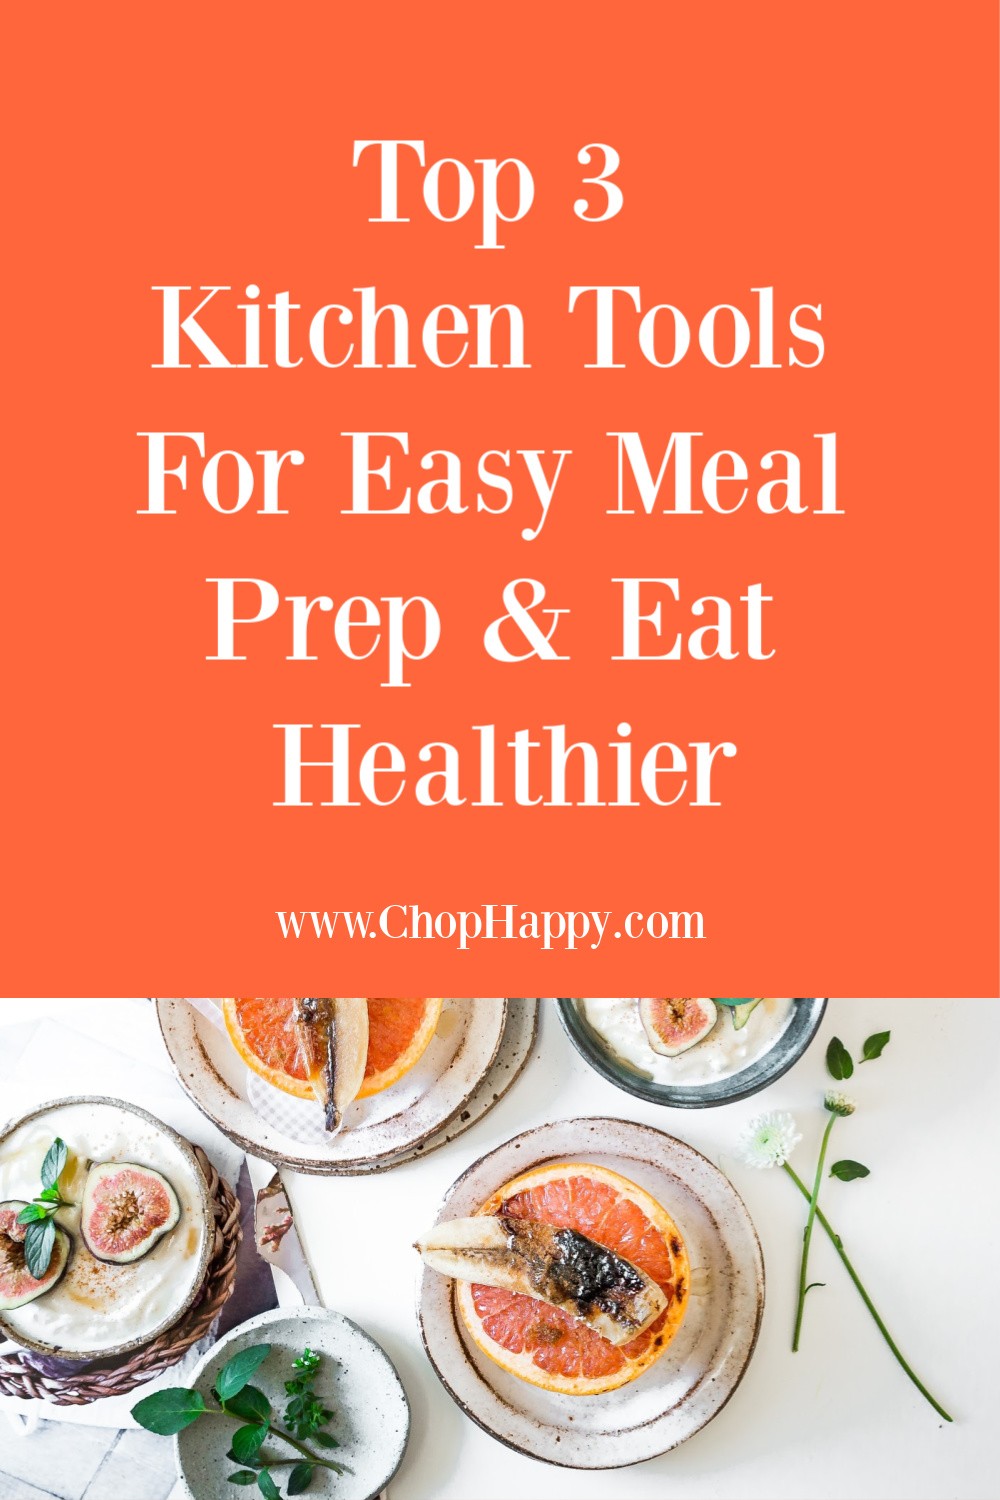 Top 3 Kitchen Tools For Easy Meal Prep & Eat Healthier. Meal prep helps busy moms get dinner on the table and have time for themselves. Happy Cooking! #mealprep #dinnerideas